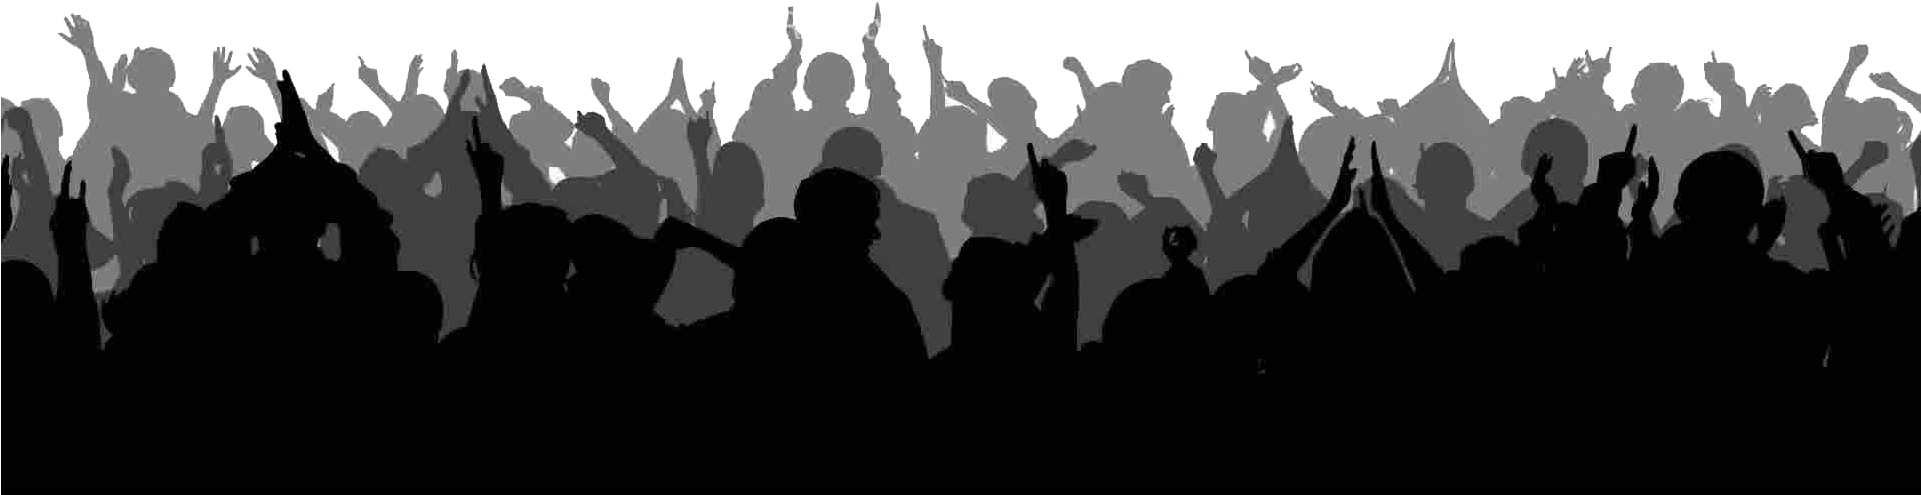 Excited Crowd Silhouette PNG image